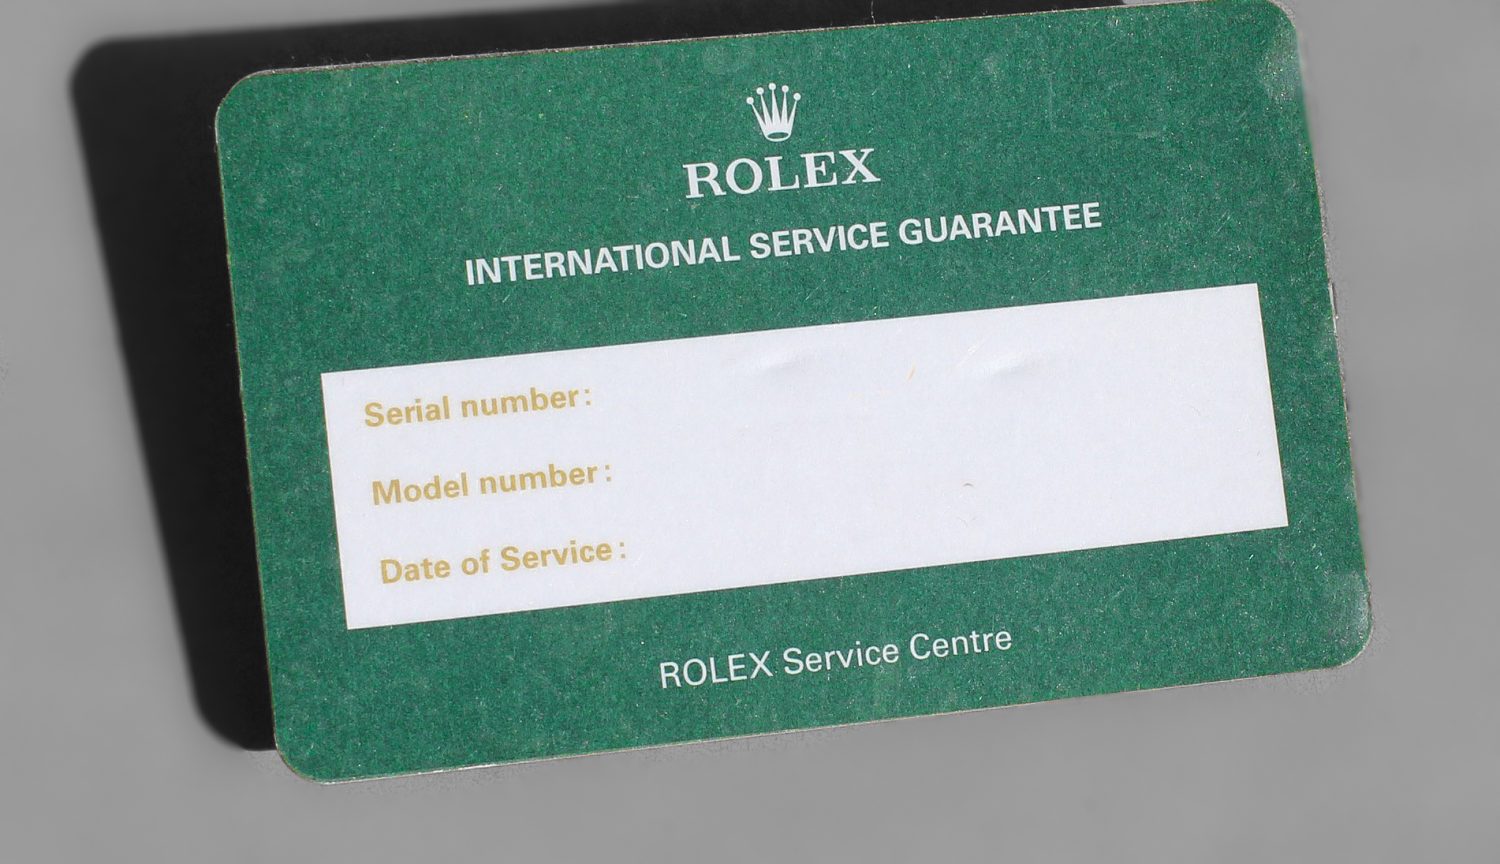 Rolex Warranty Card Fake Vs. Real: How To Check Authenticity?